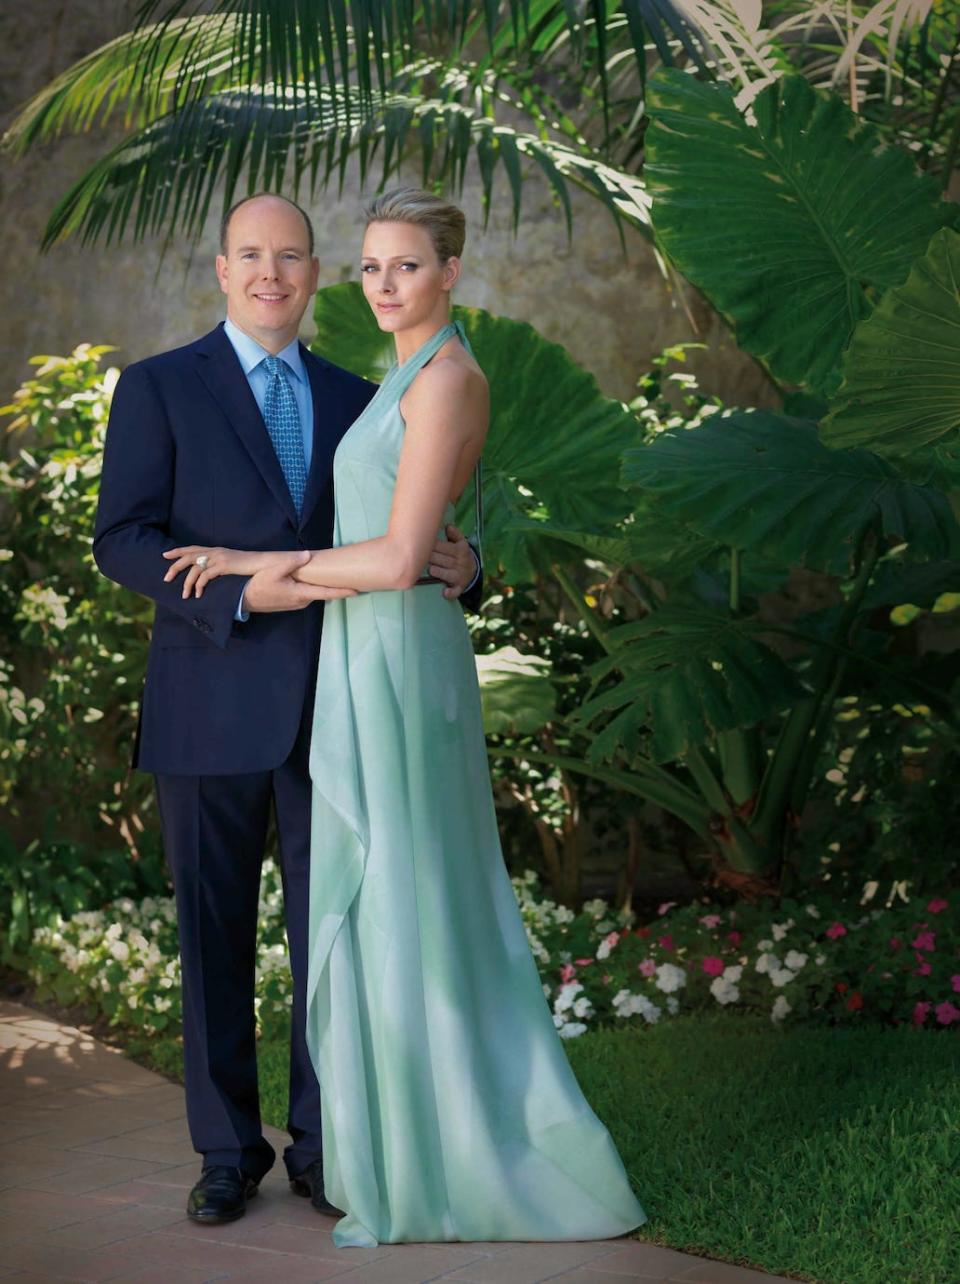 Prince Albert II and Charlene Wittstock's official engagement portrait In Monte Carlo, Monaco on June 23, 2010.